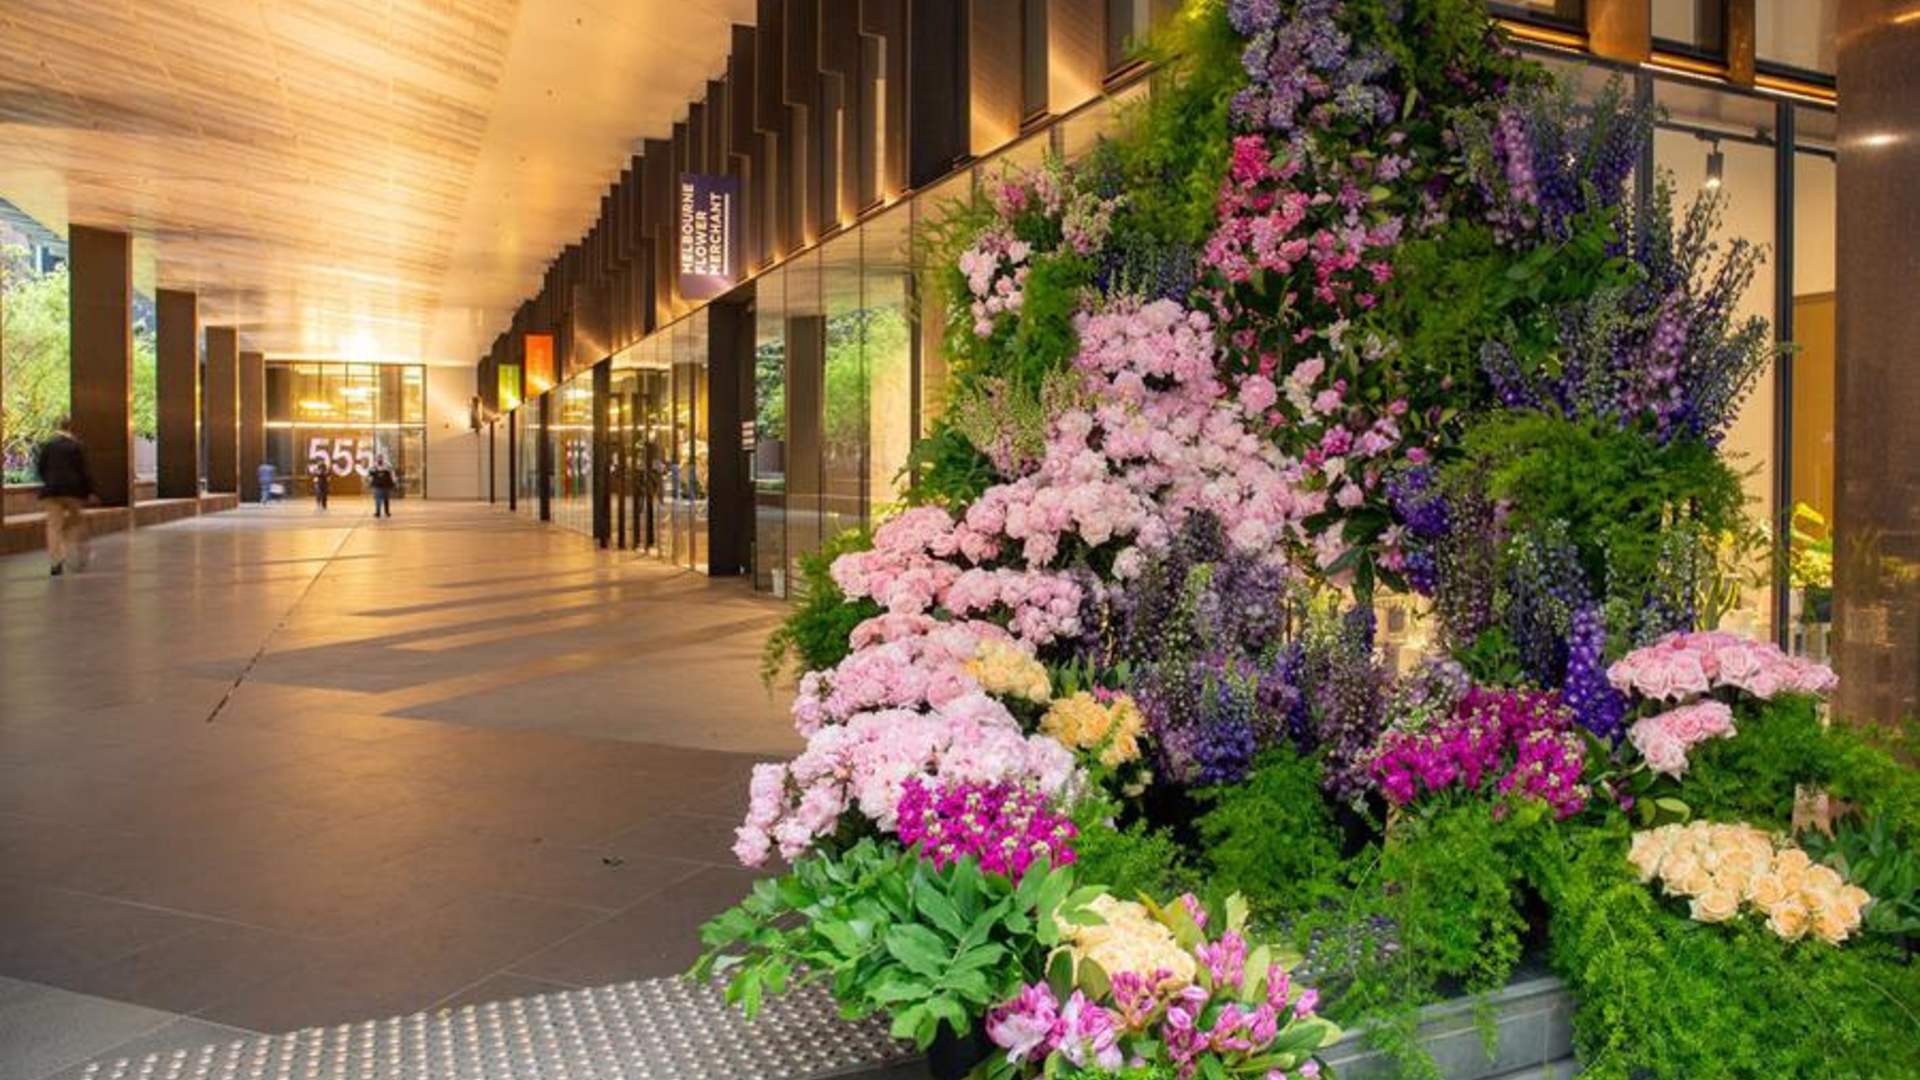 Large-Scale Flower Installations Will Descend on Melbourne as Part of a Reinvigoration Project